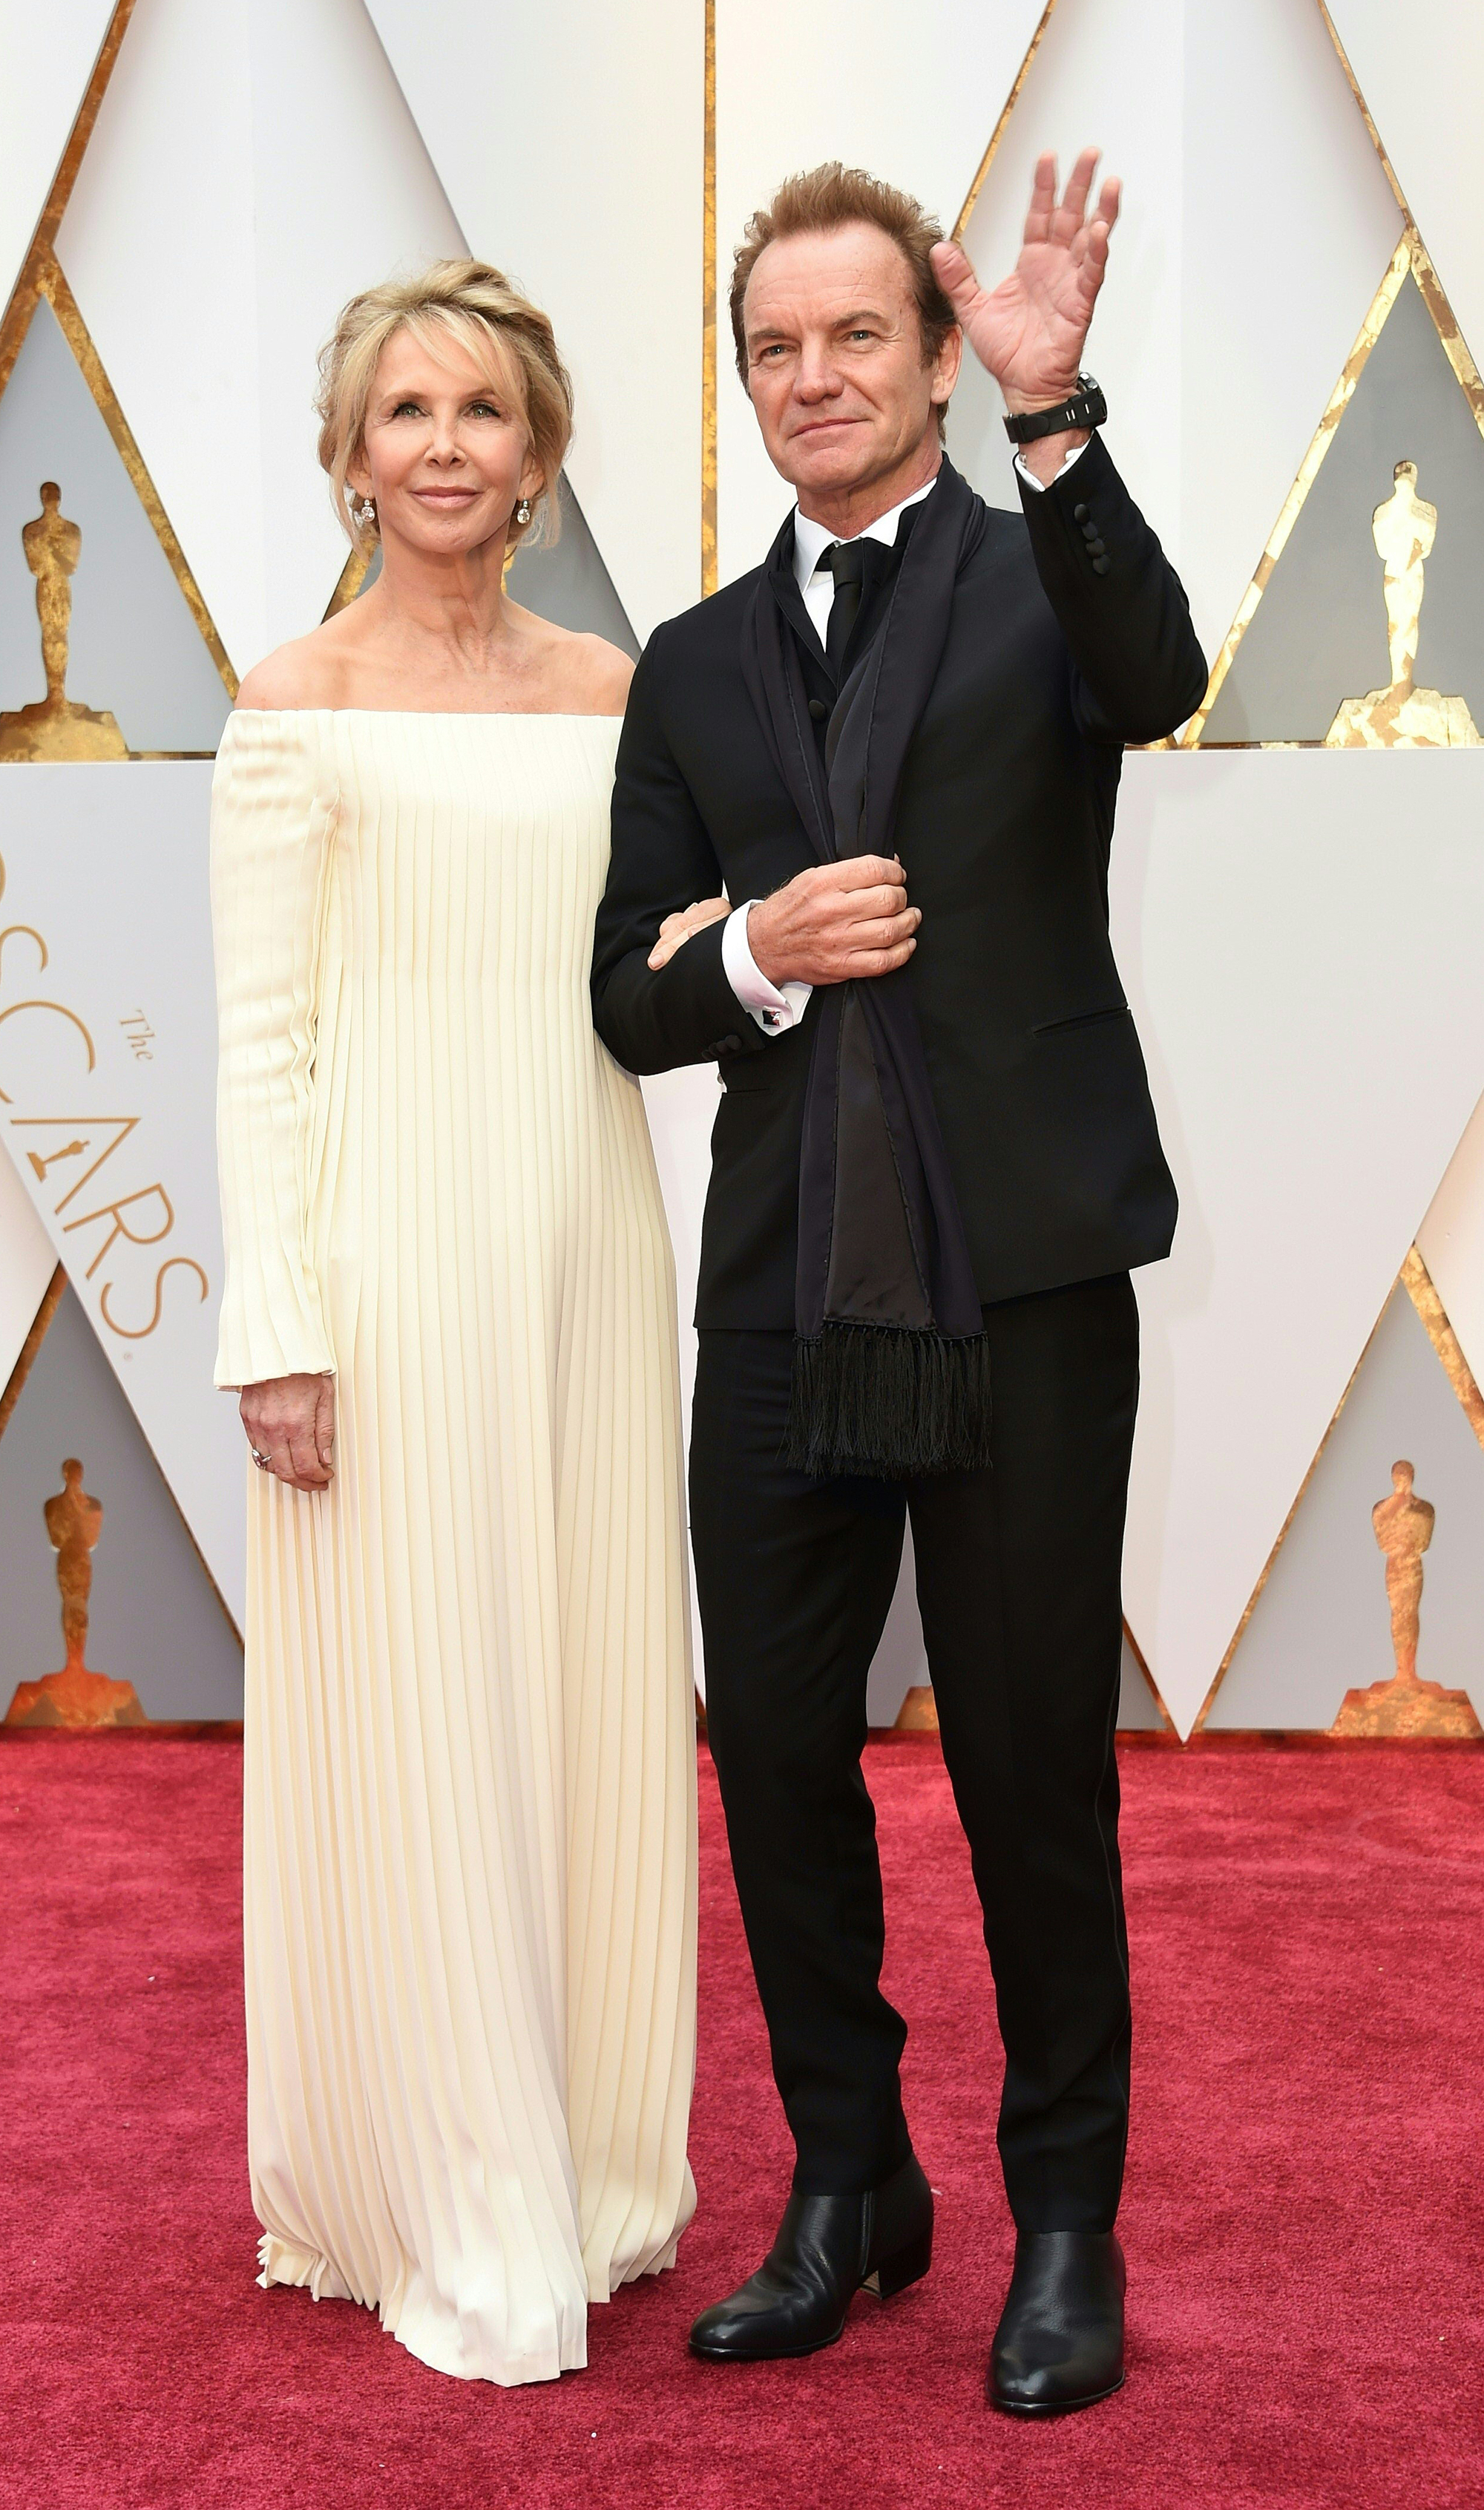 Trudie Styler and Sting on the red carpet for the 89th Oscars, on Feb. 26, 2017 in Hollywood, Calif.